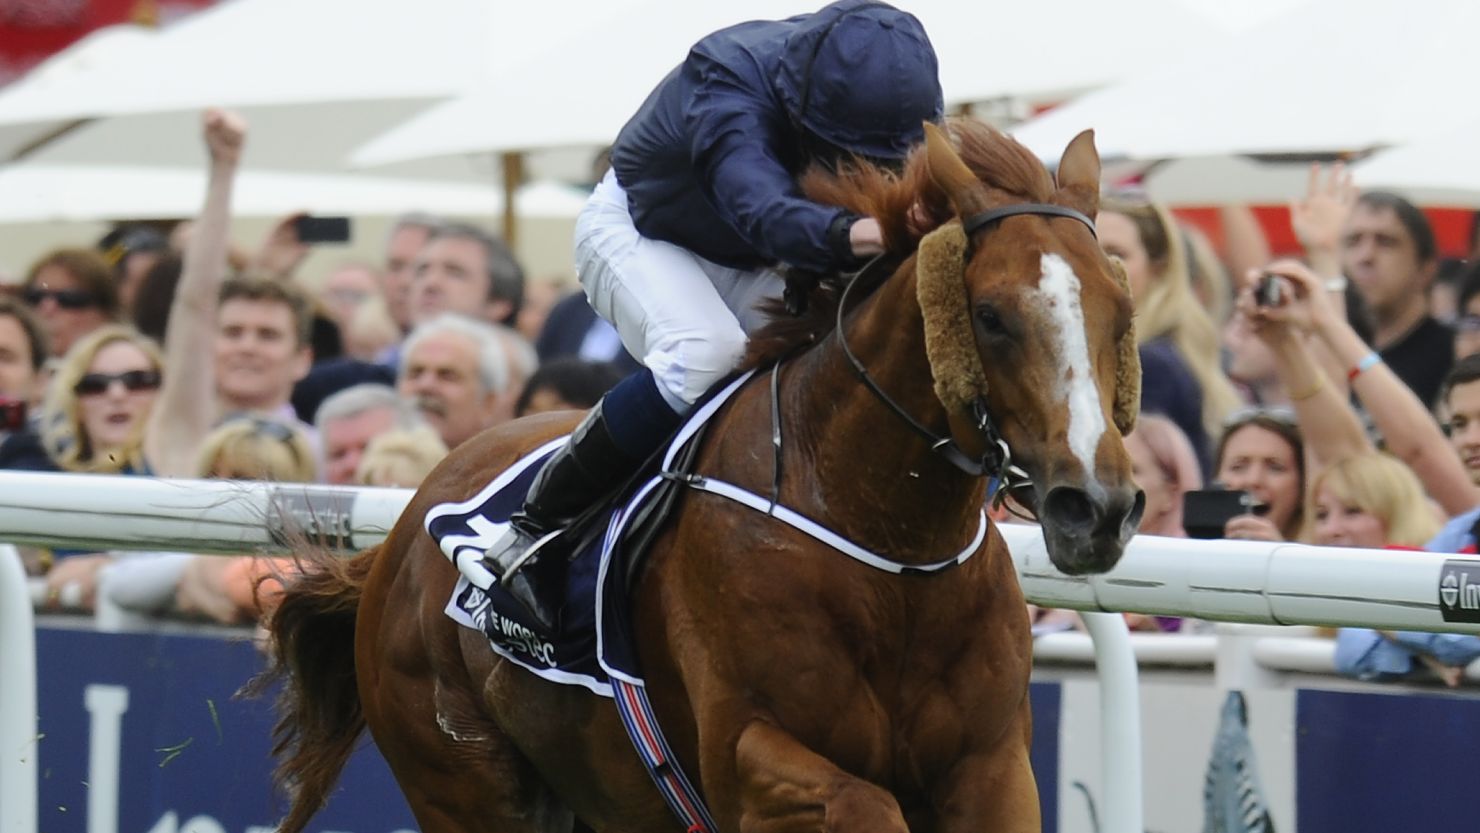 Ryan Moore rides Ruler Of The World to victory at the prestigious Epsom Derby on Saturday.